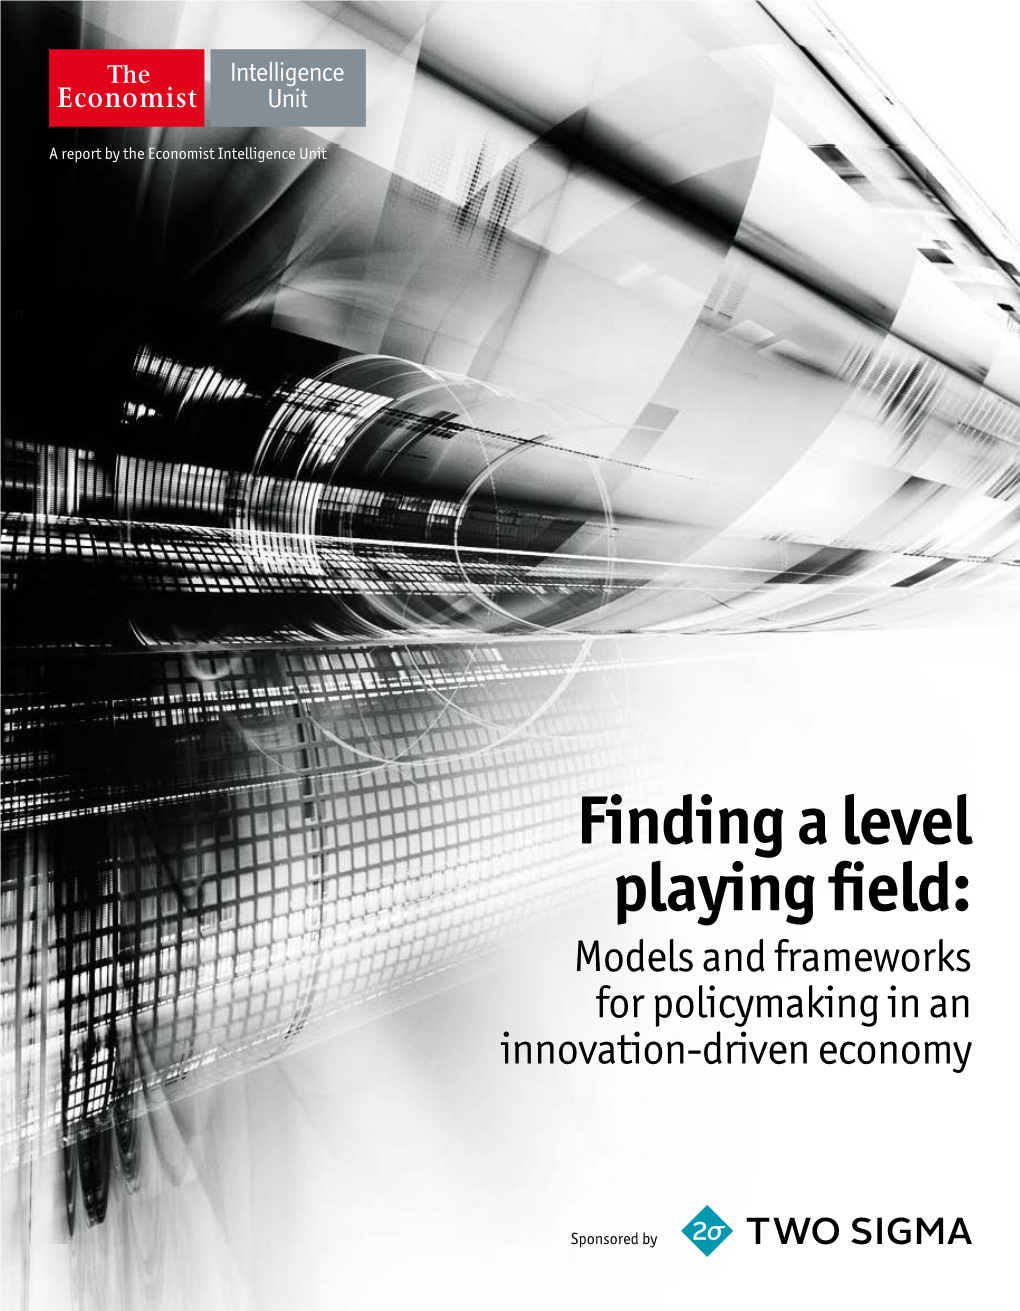 Finding a Level Playing Field: Models and Frameworks for Policymaking in an Innovation-Driven Economy